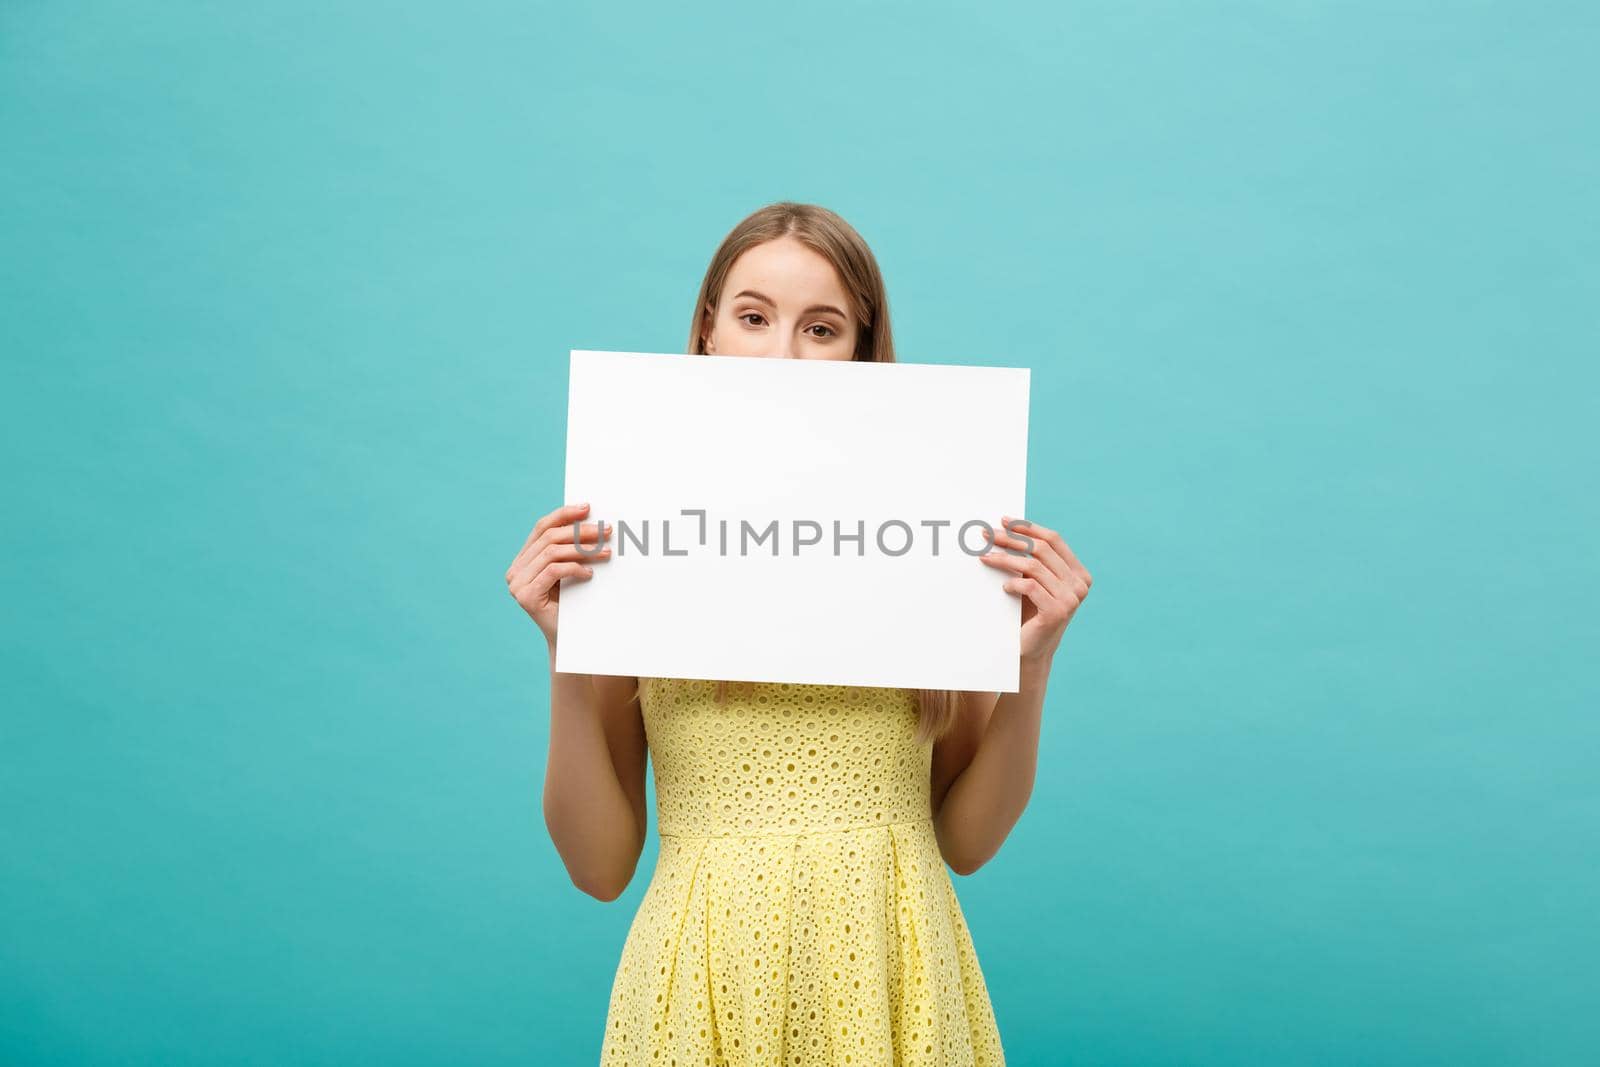 Beautiful woman holding a blank billboard isolated on blue background.